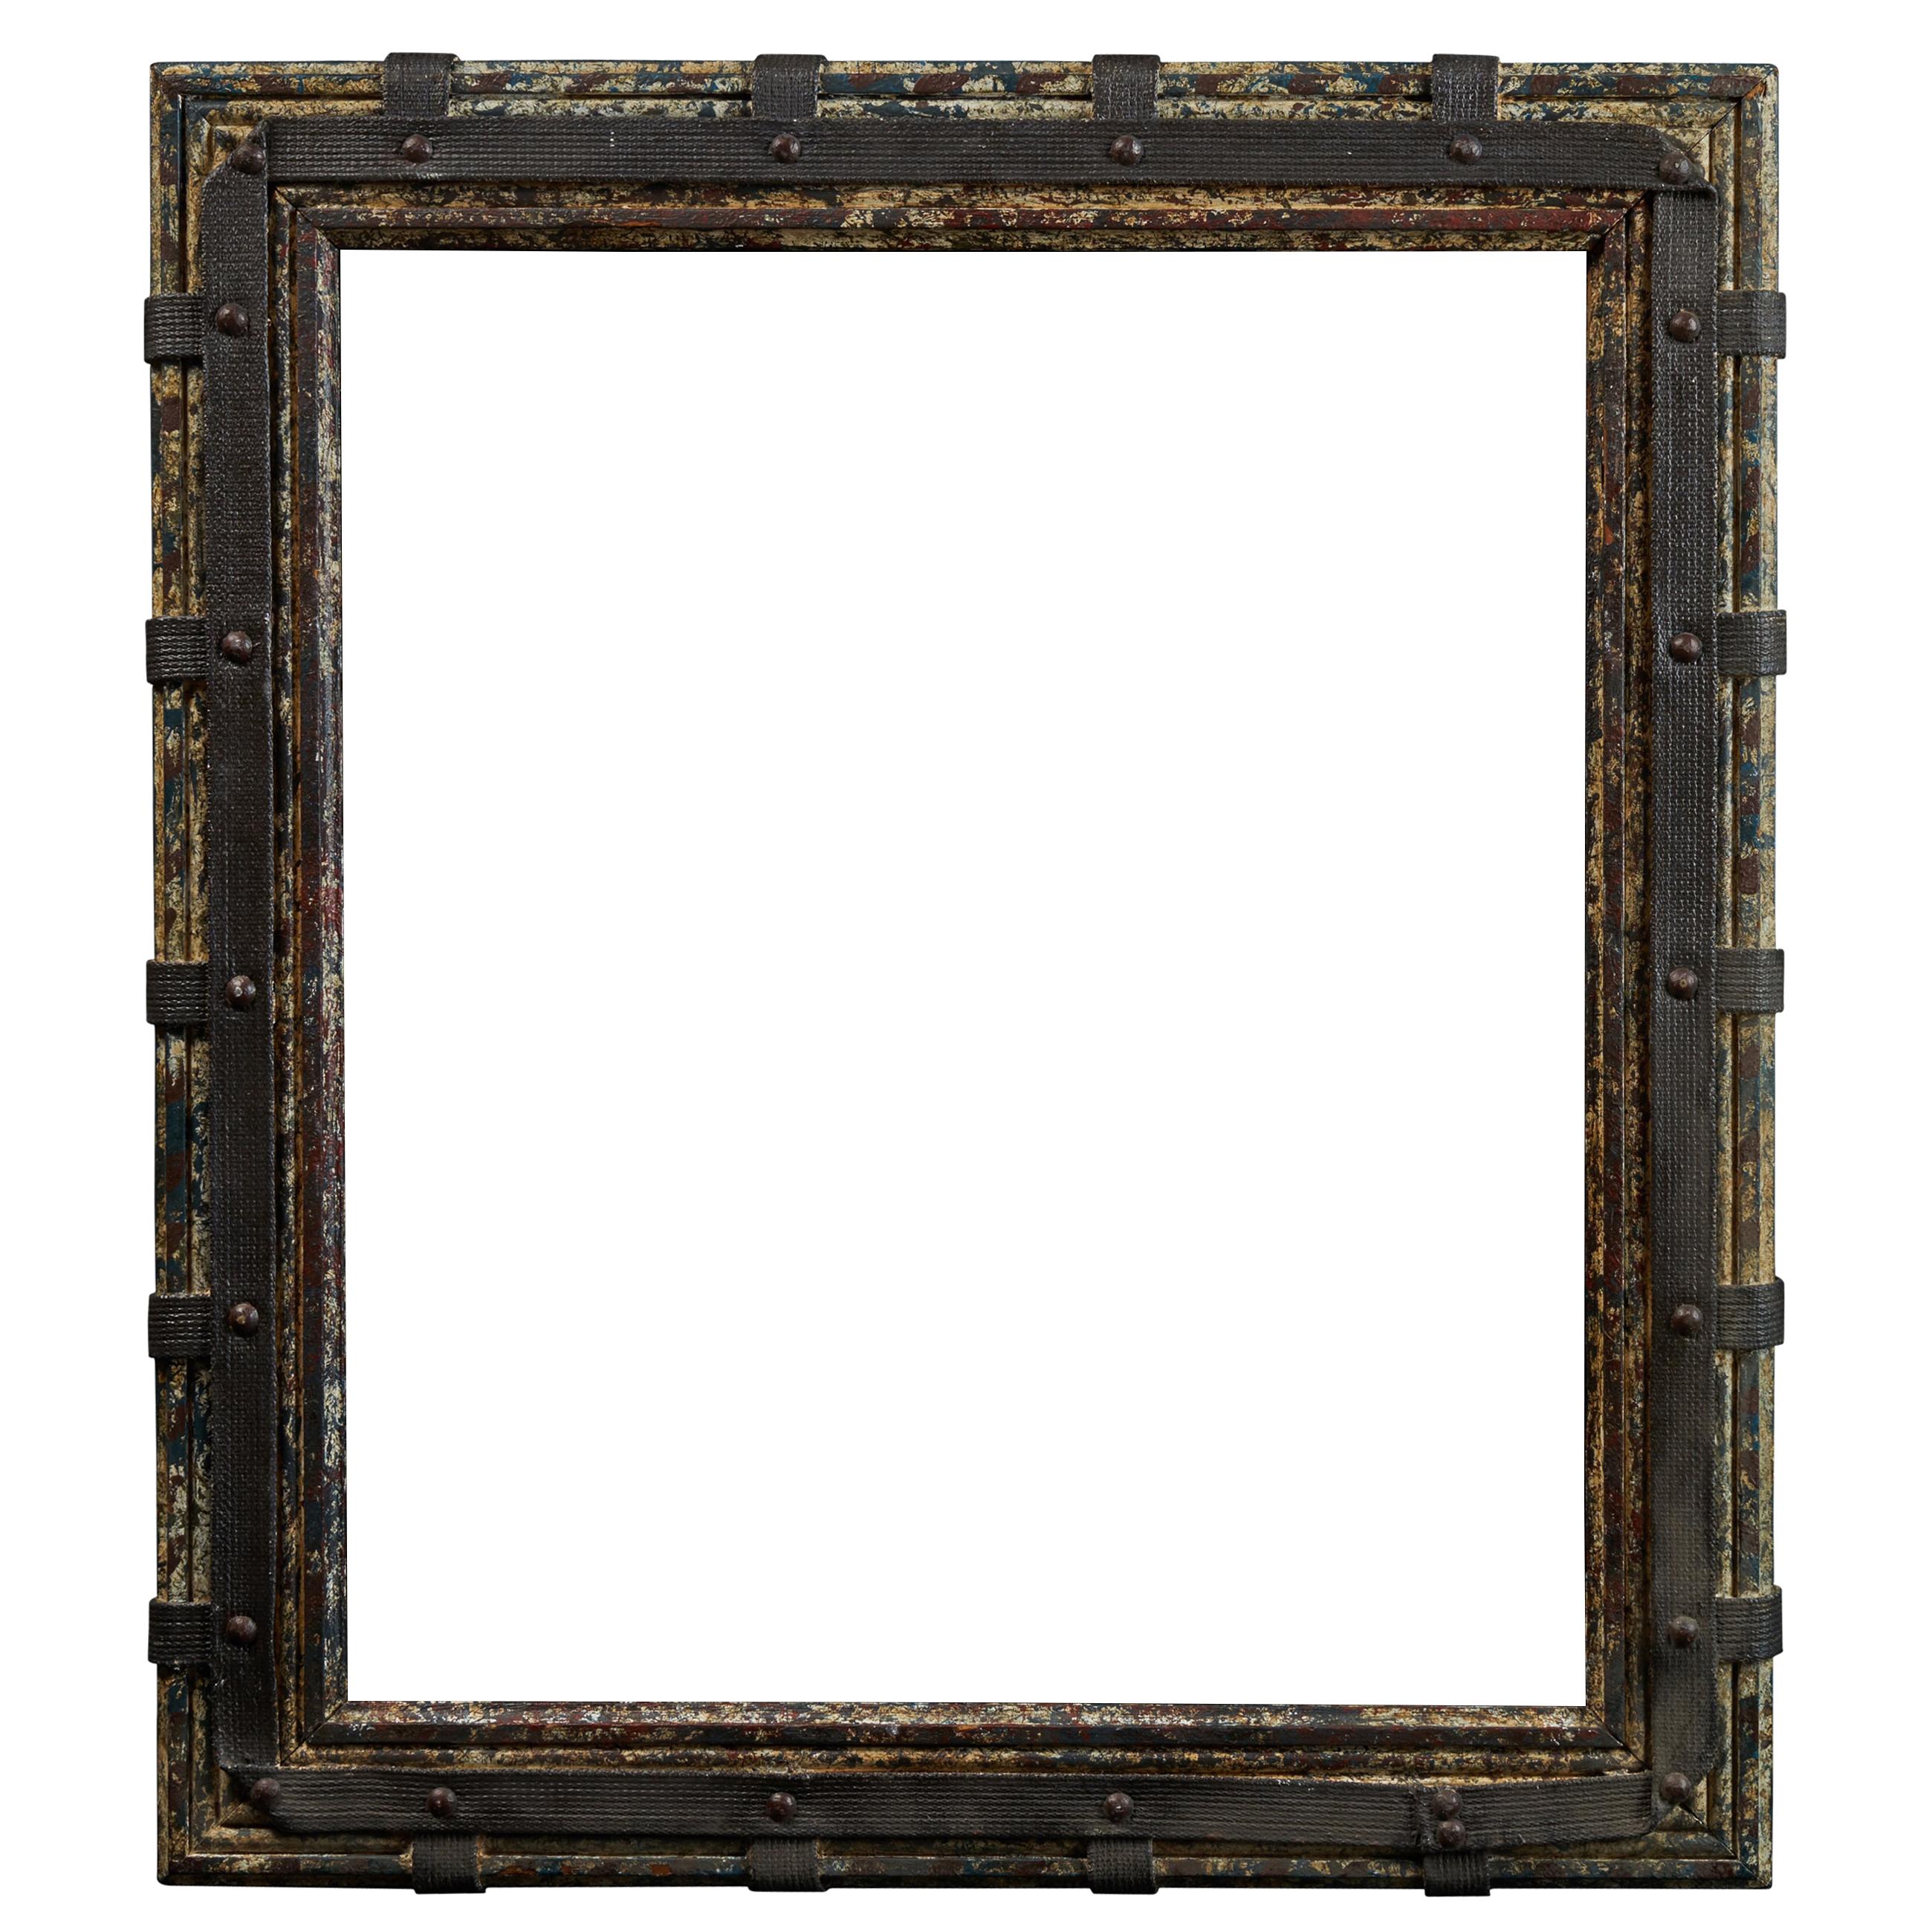 These wonderful frames and the mirror are assembled with salvaged materials.
Between 63 x 55.5 x 2 and 74.5 x 69 x 7.

 